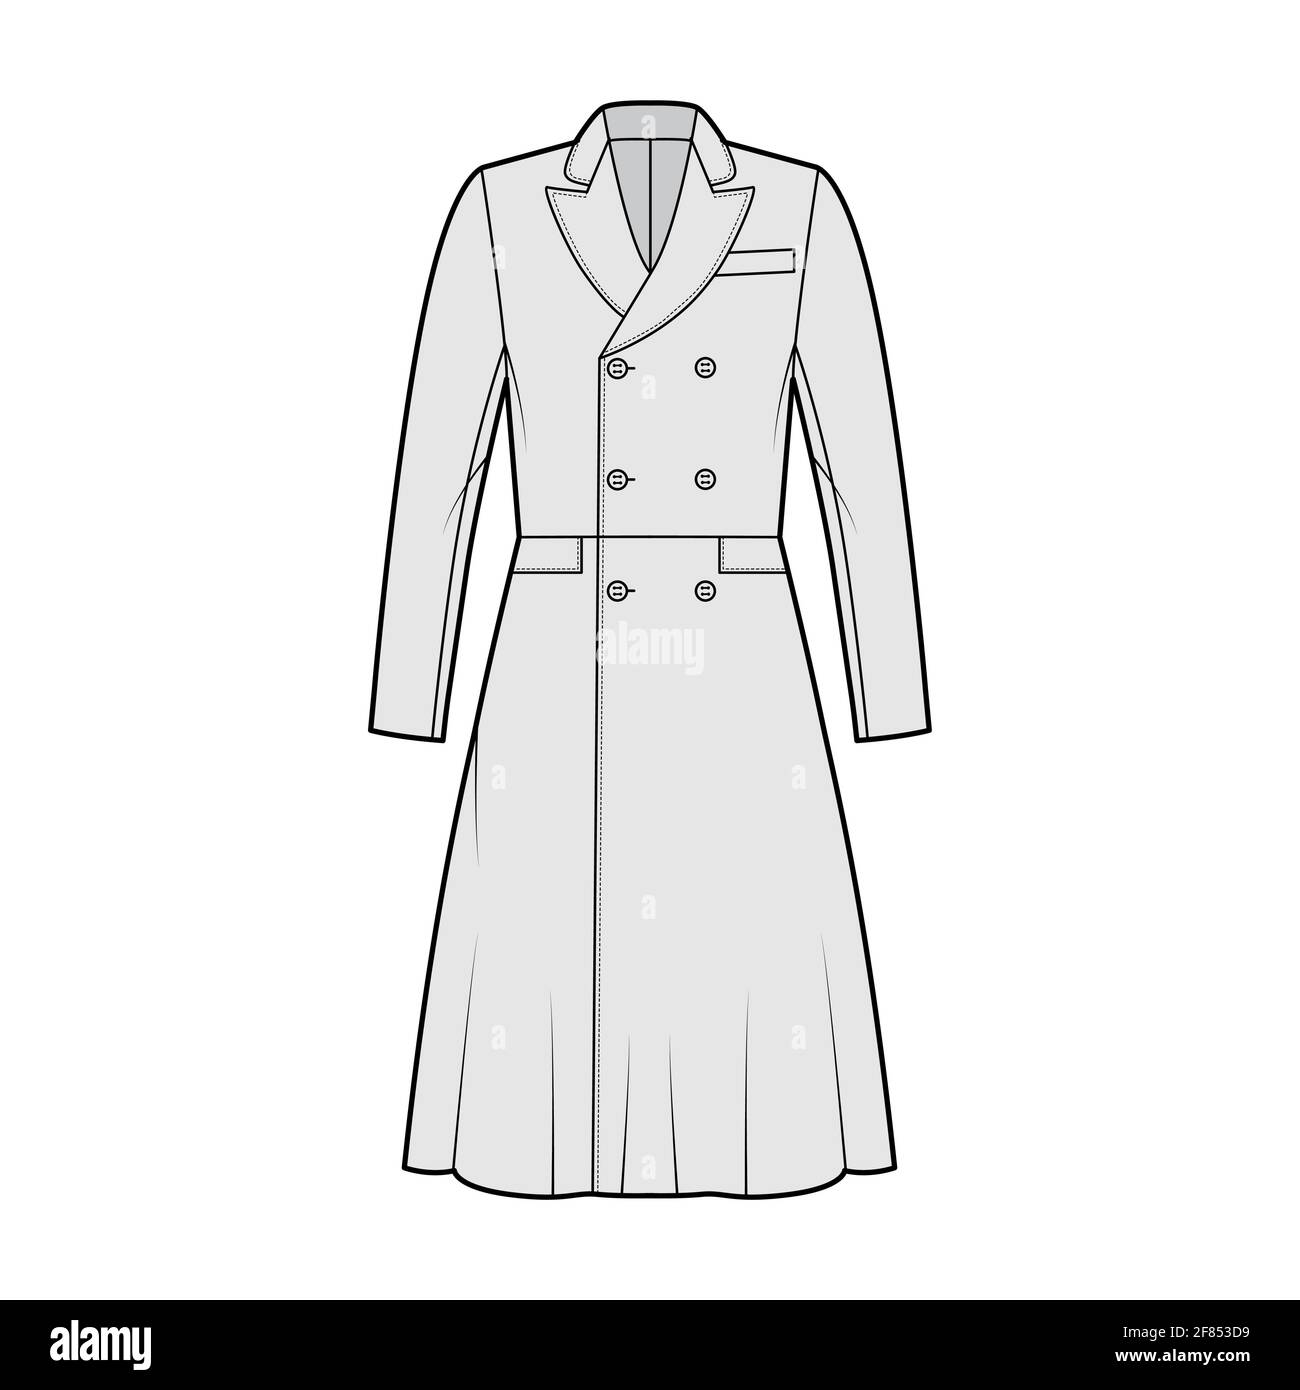 Frock coat technical fashion illustration with double breasted, fitted body, long sleeves, round collar peak, A-line skirt. Flat jacket template front, grey color style. Women, men, unisex CAD mockup Stock Vector